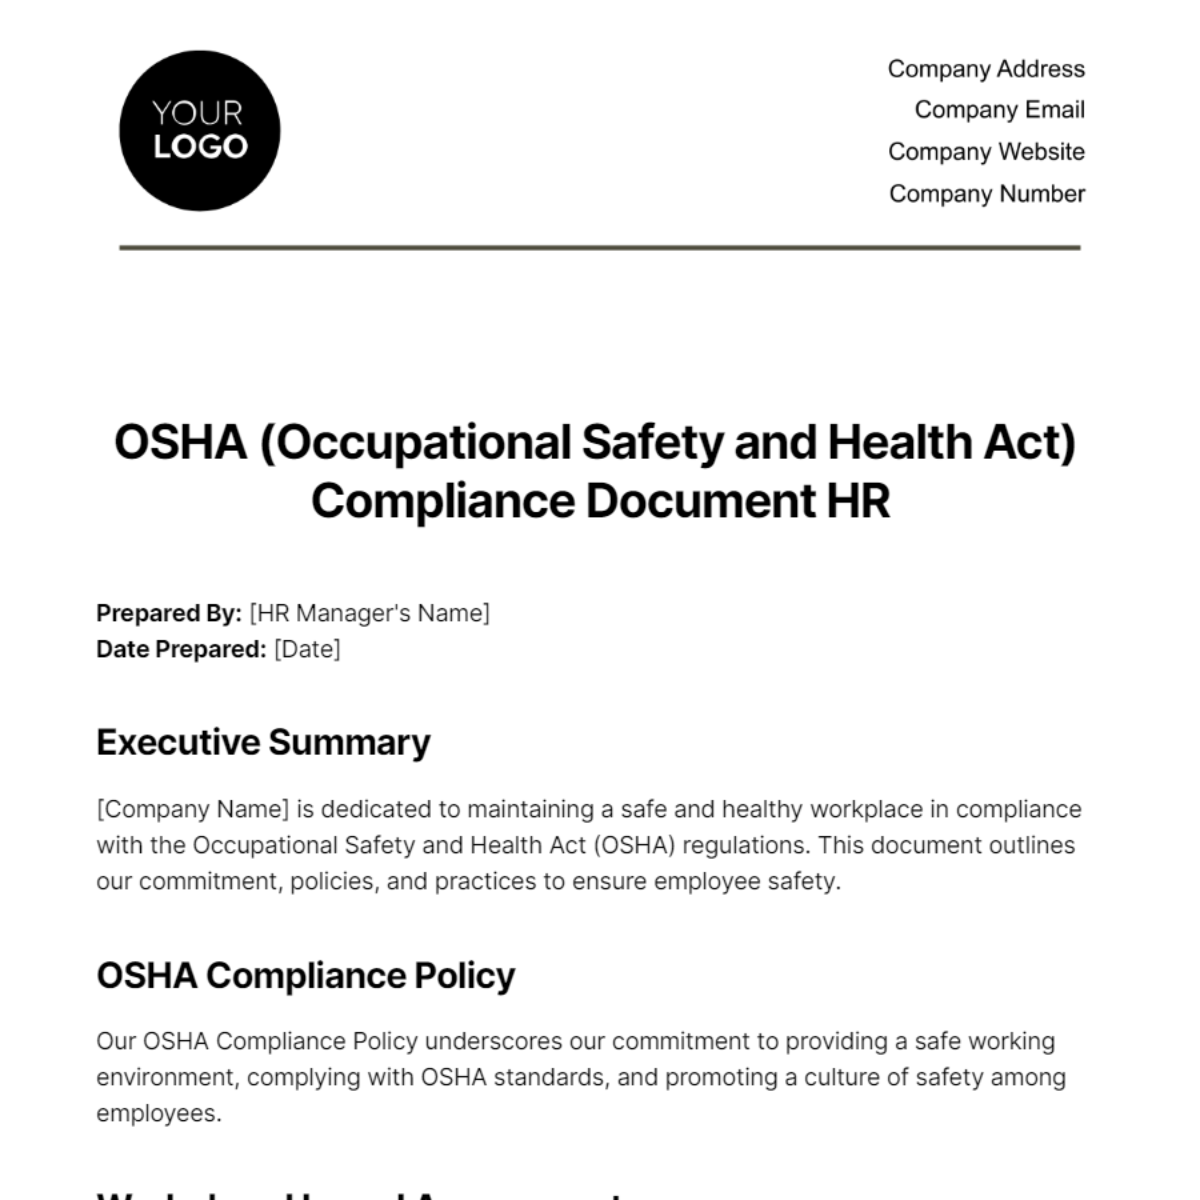 Free OSHA (Occupational Safety and Health Act) Compliance Document HR Template